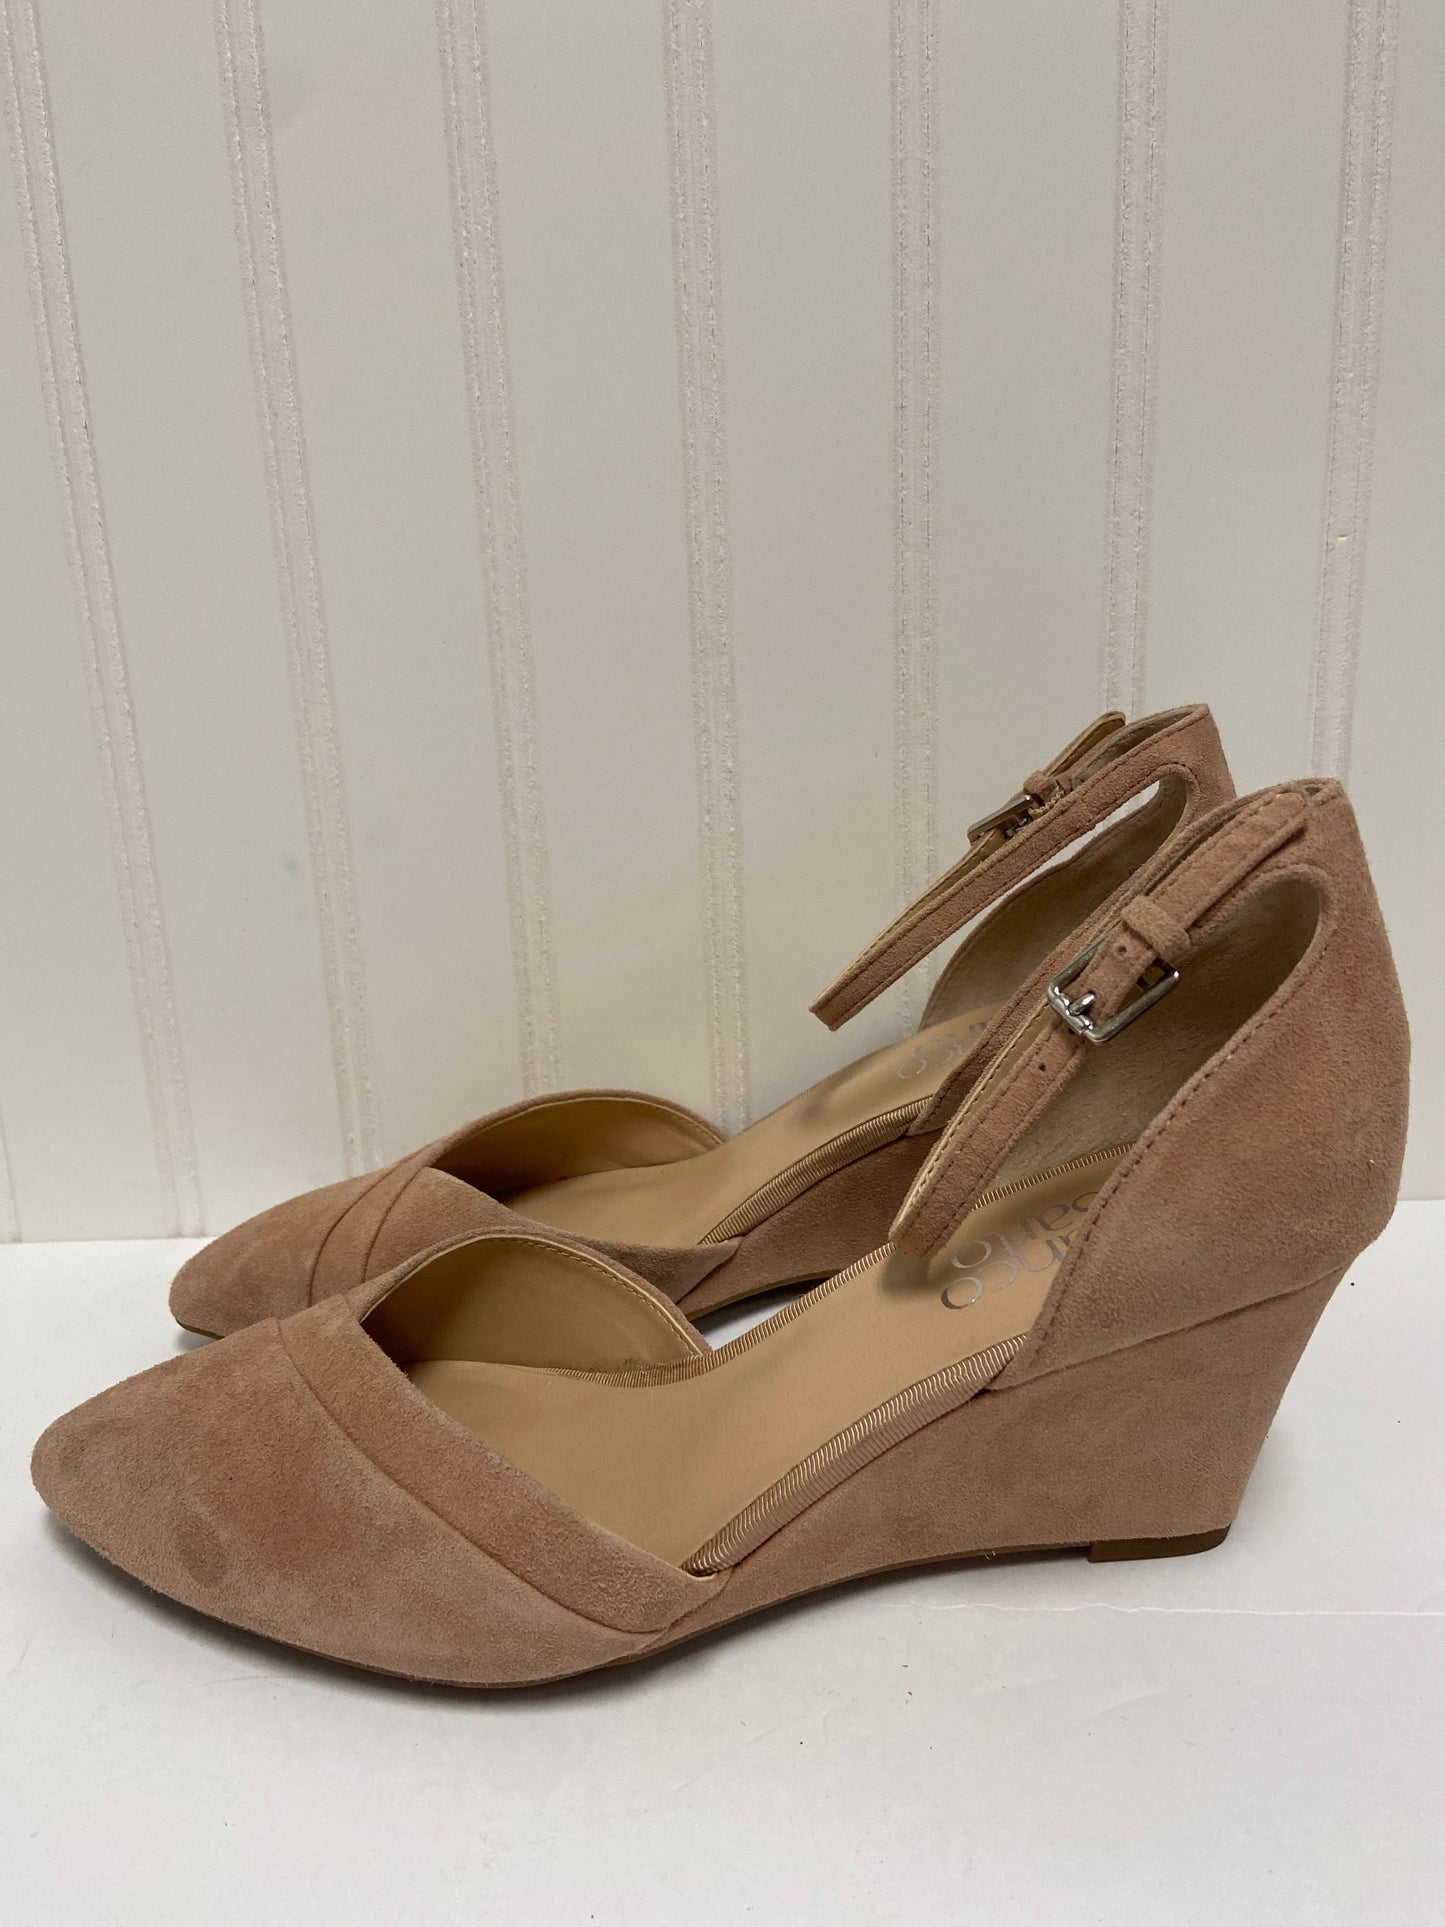 Shoes Heels Wedge By Franco Sarto  Size: 7.5